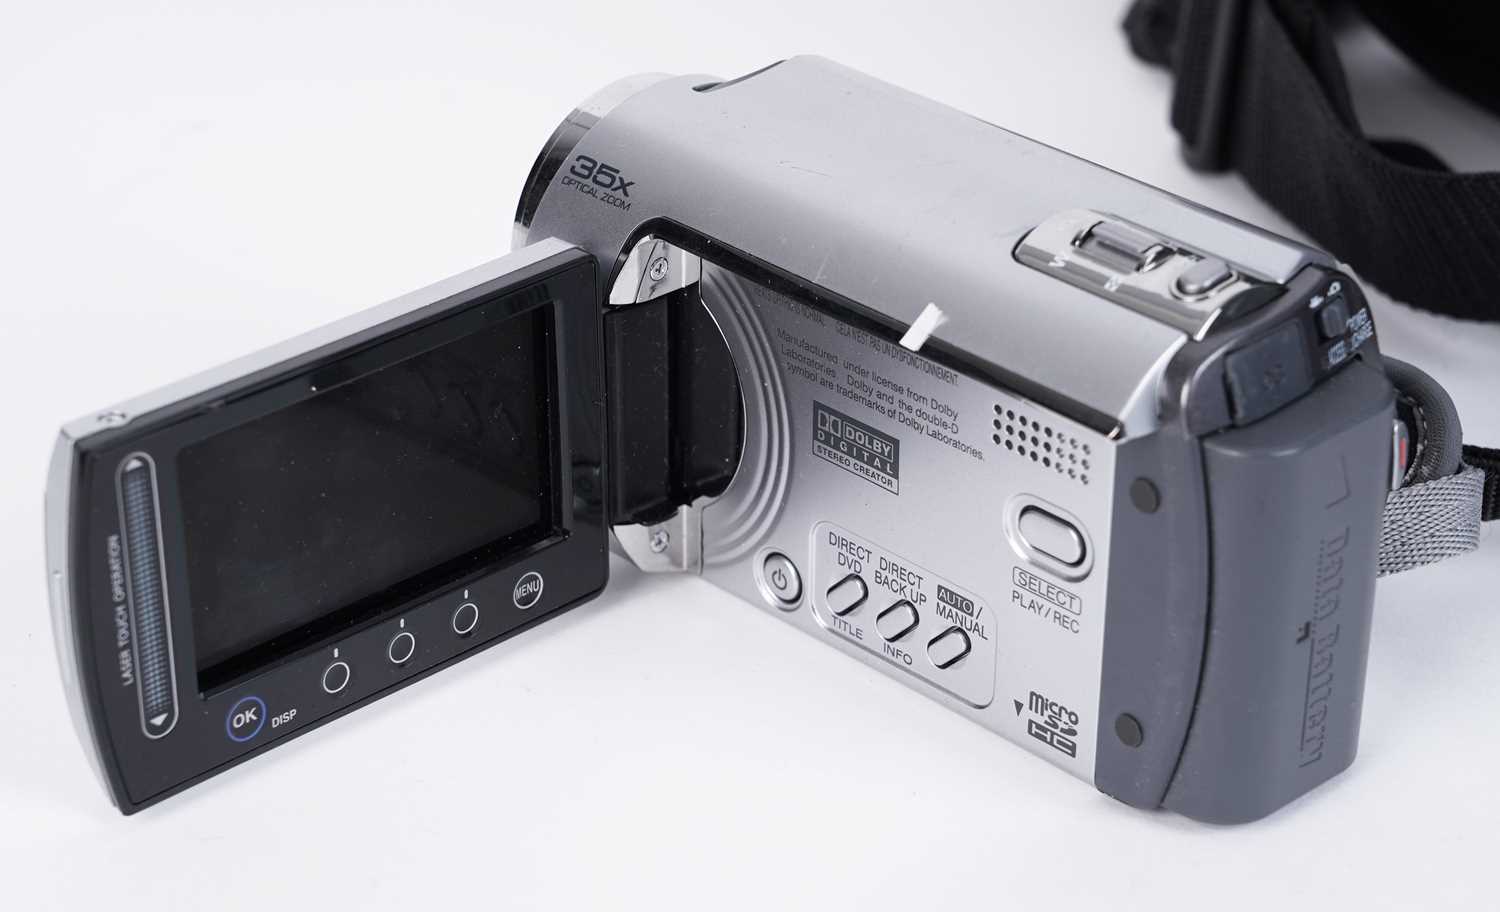 Sony 200 digital camera with various lenses - Image 5 of 6